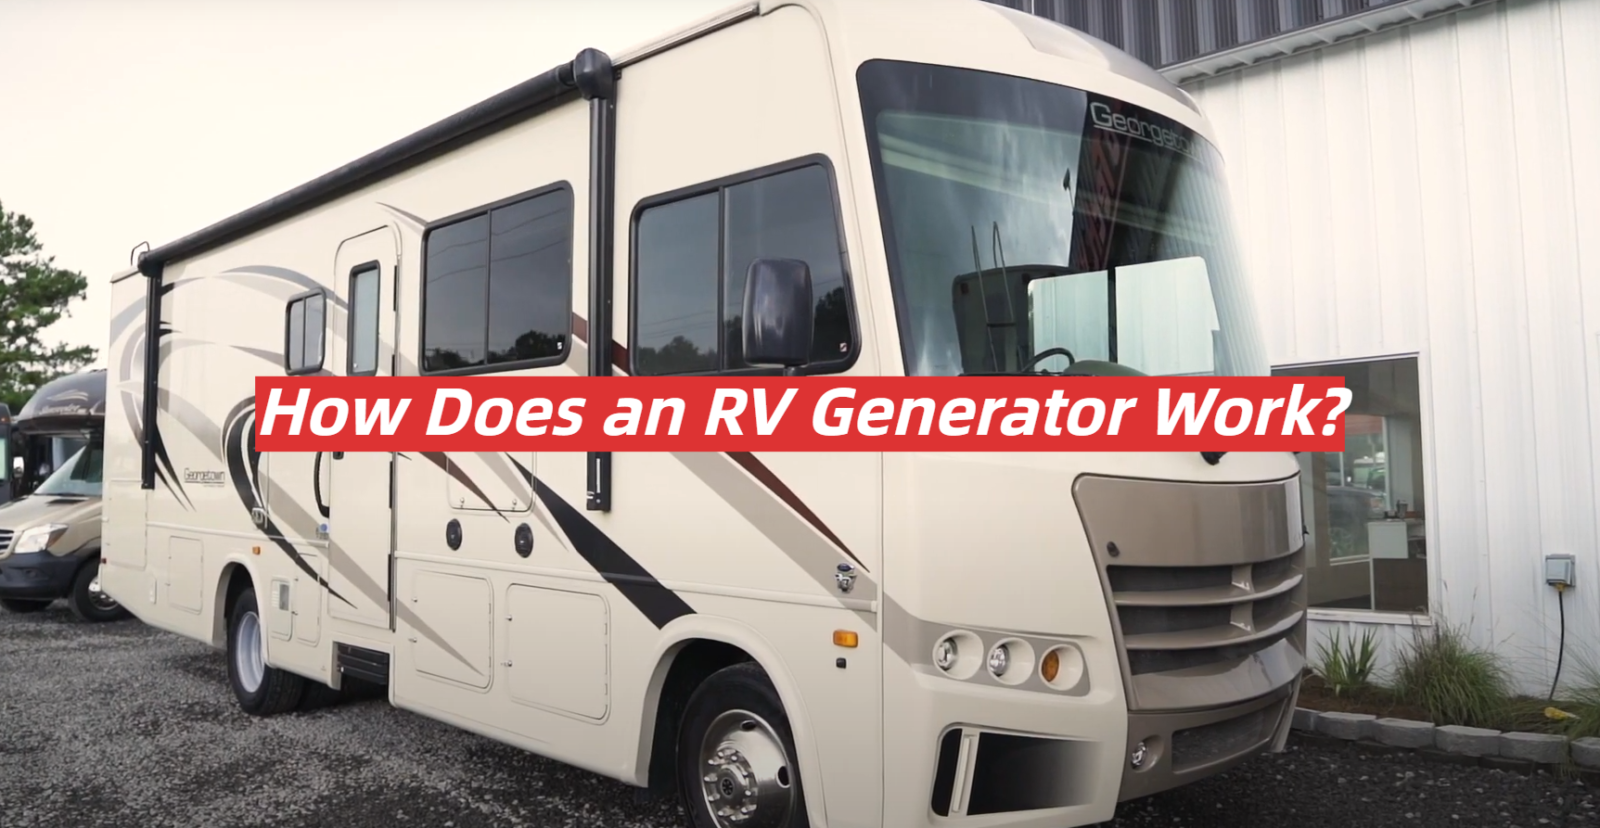 How Does an RV Generator Work?